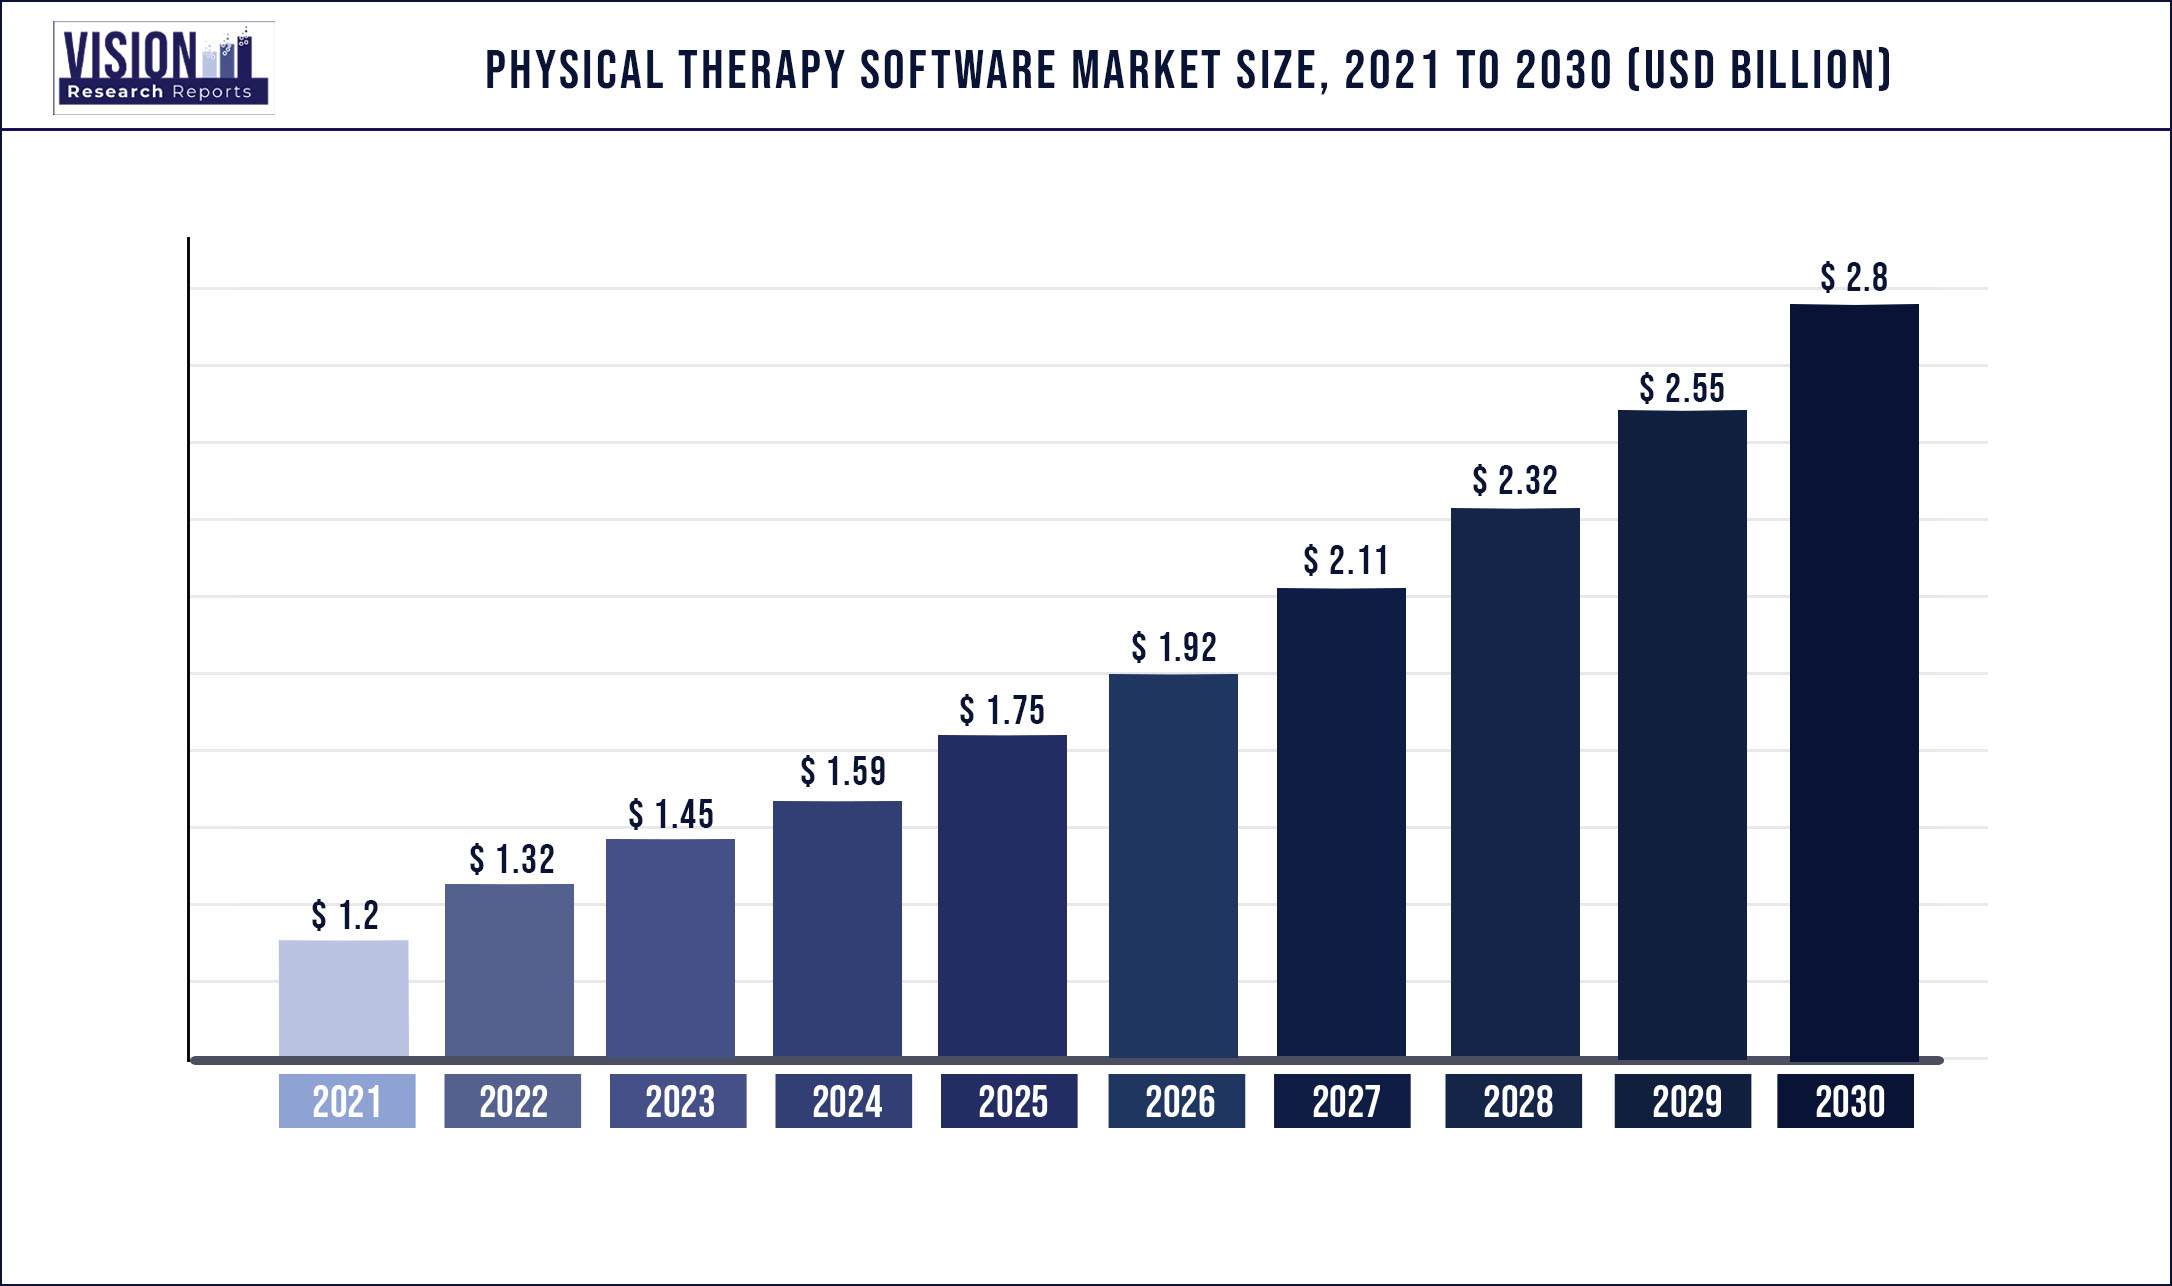 Physical Therapy Software Market Size 2021 to 2030